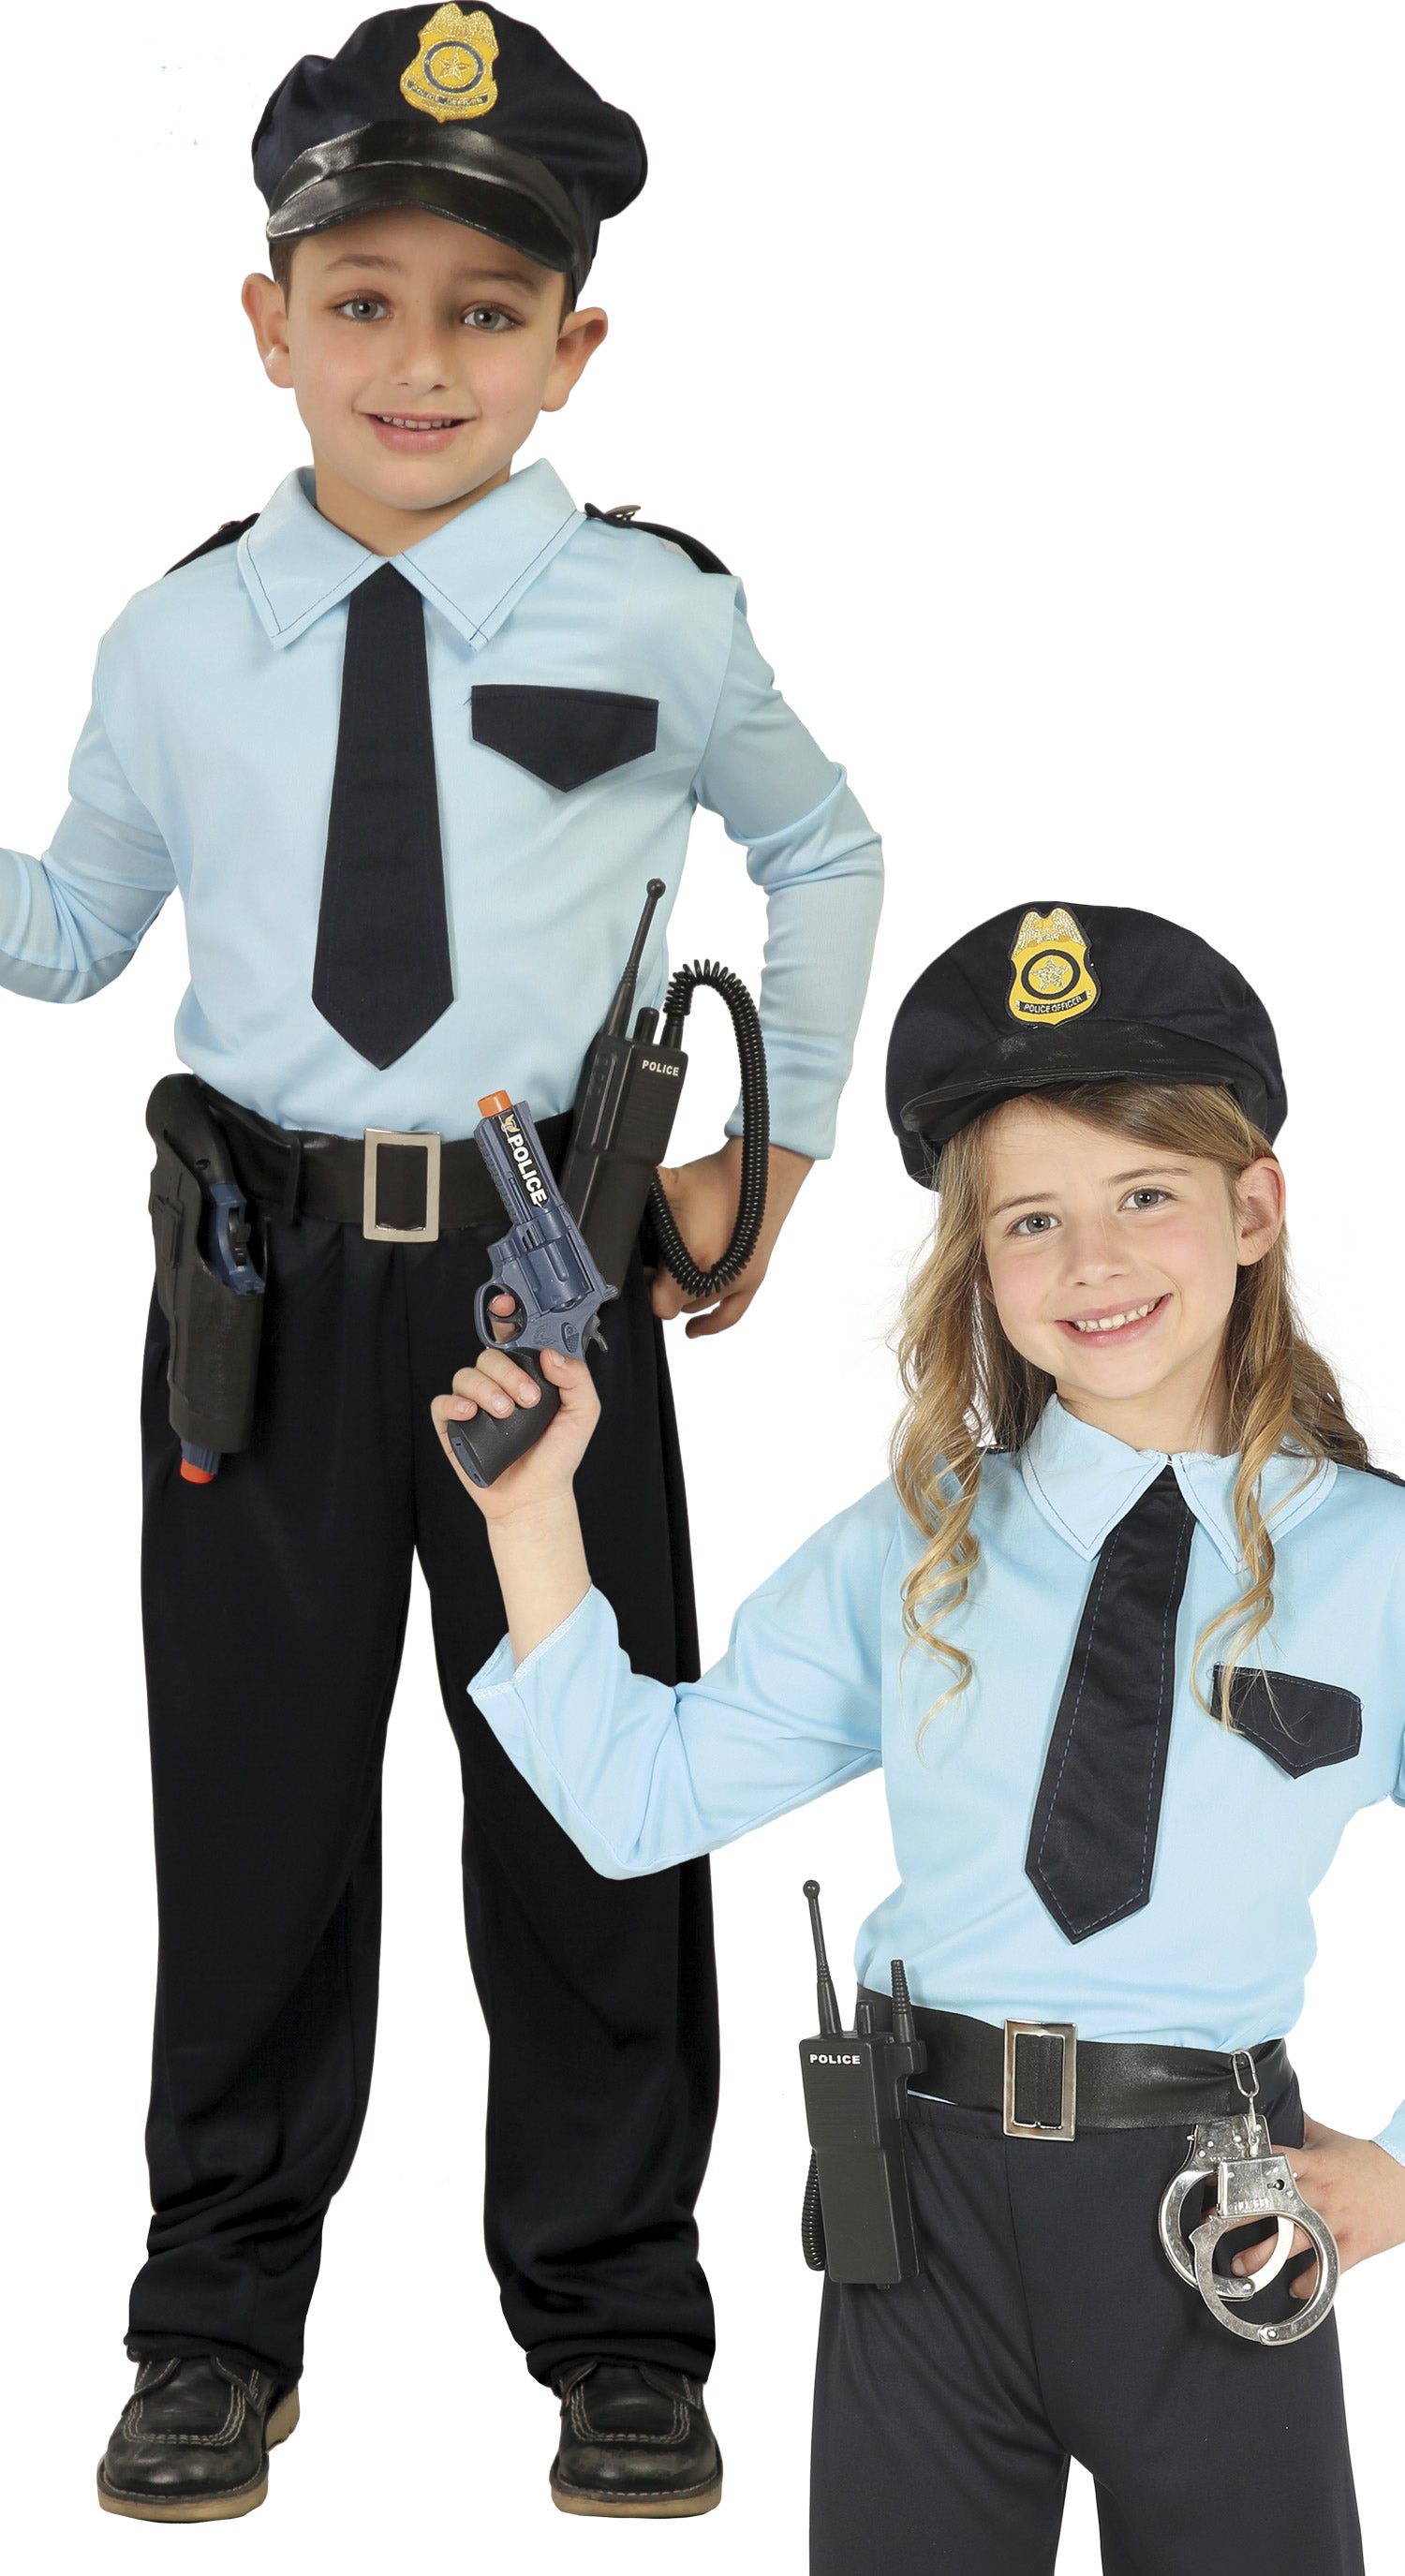 Kids Police Officer Costume for boys and girls.